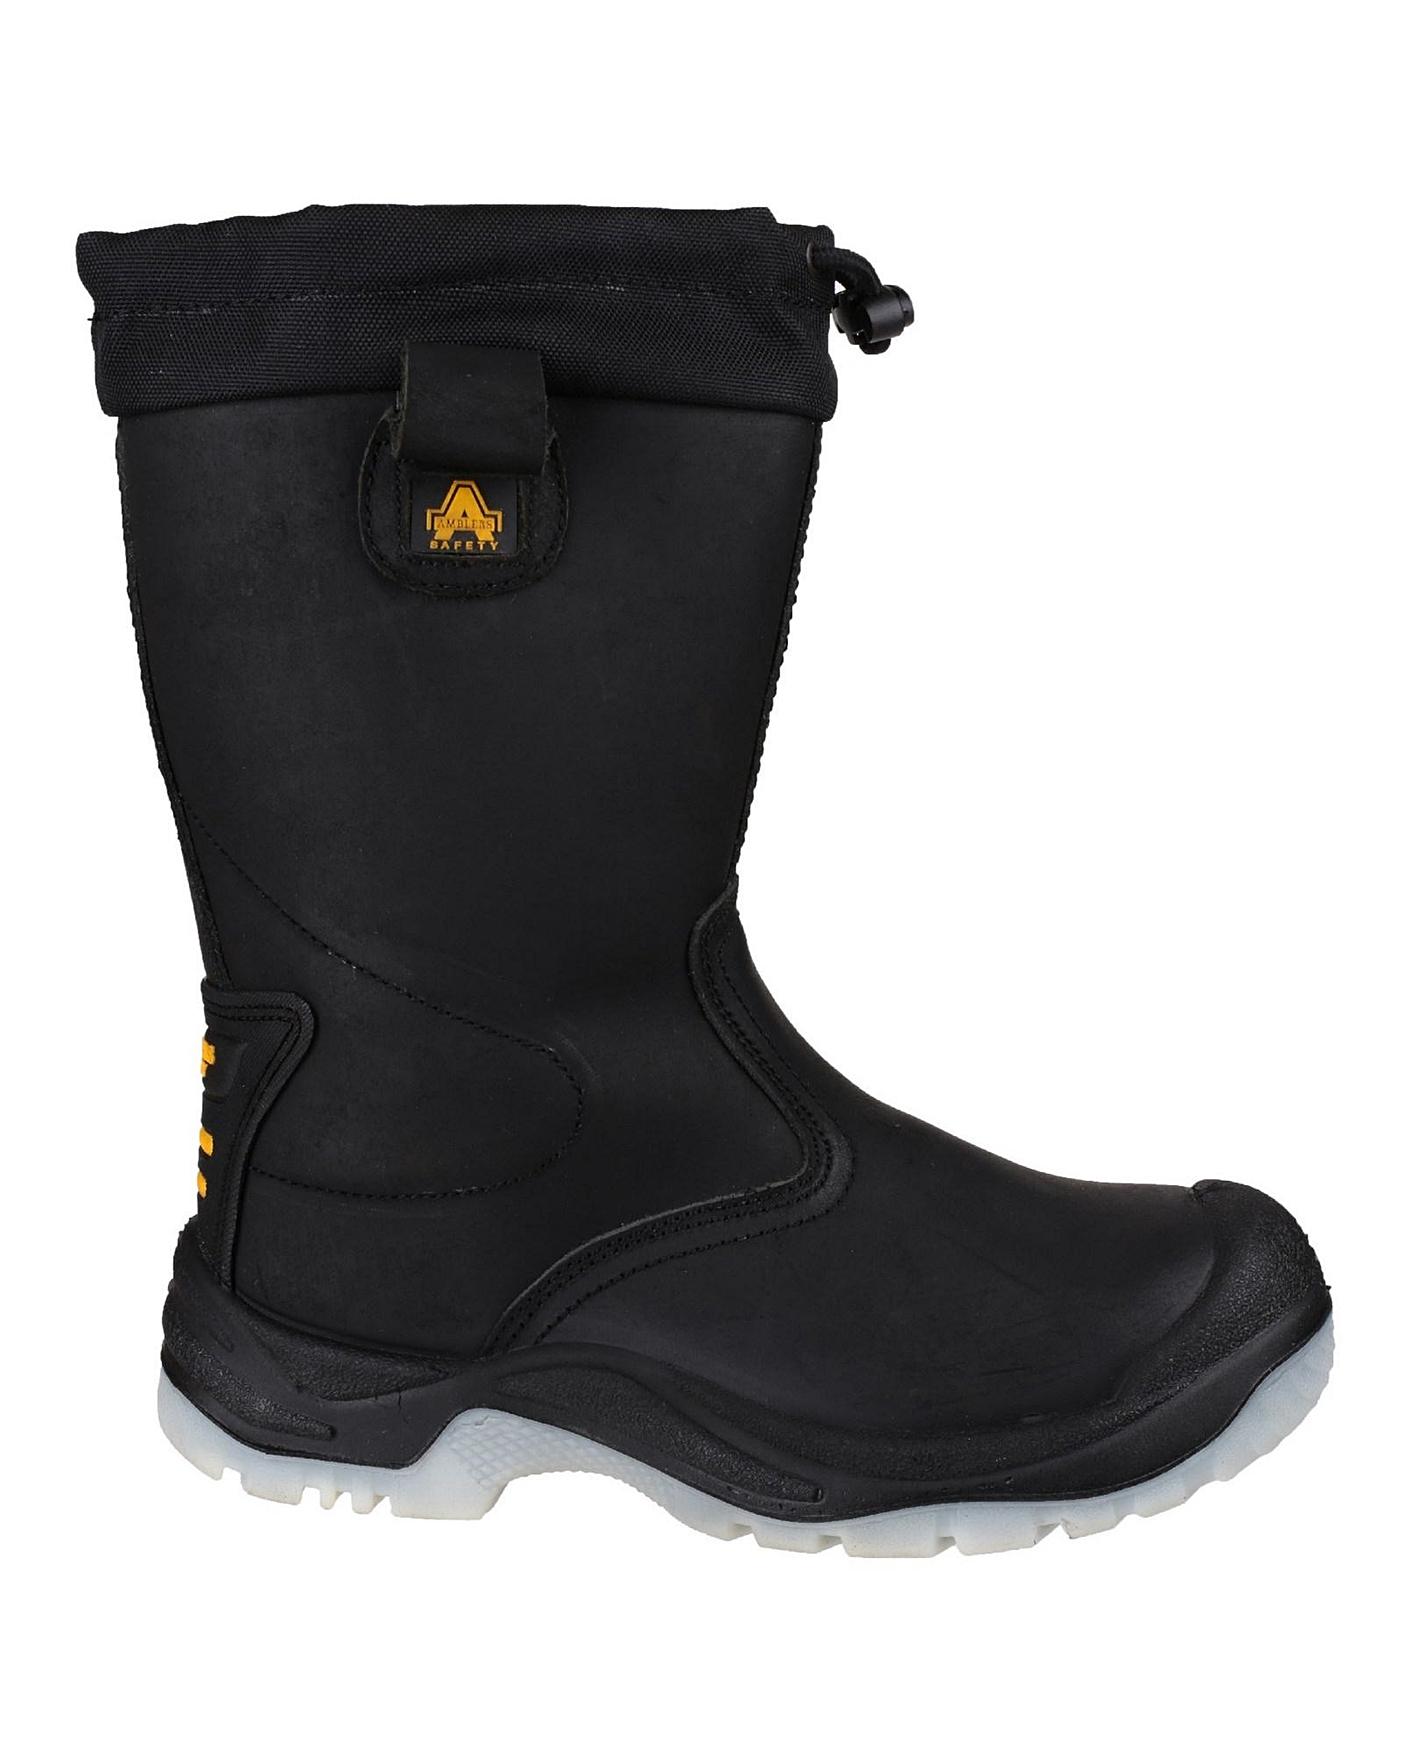 Amblers Safety FS209 Rigger Boot